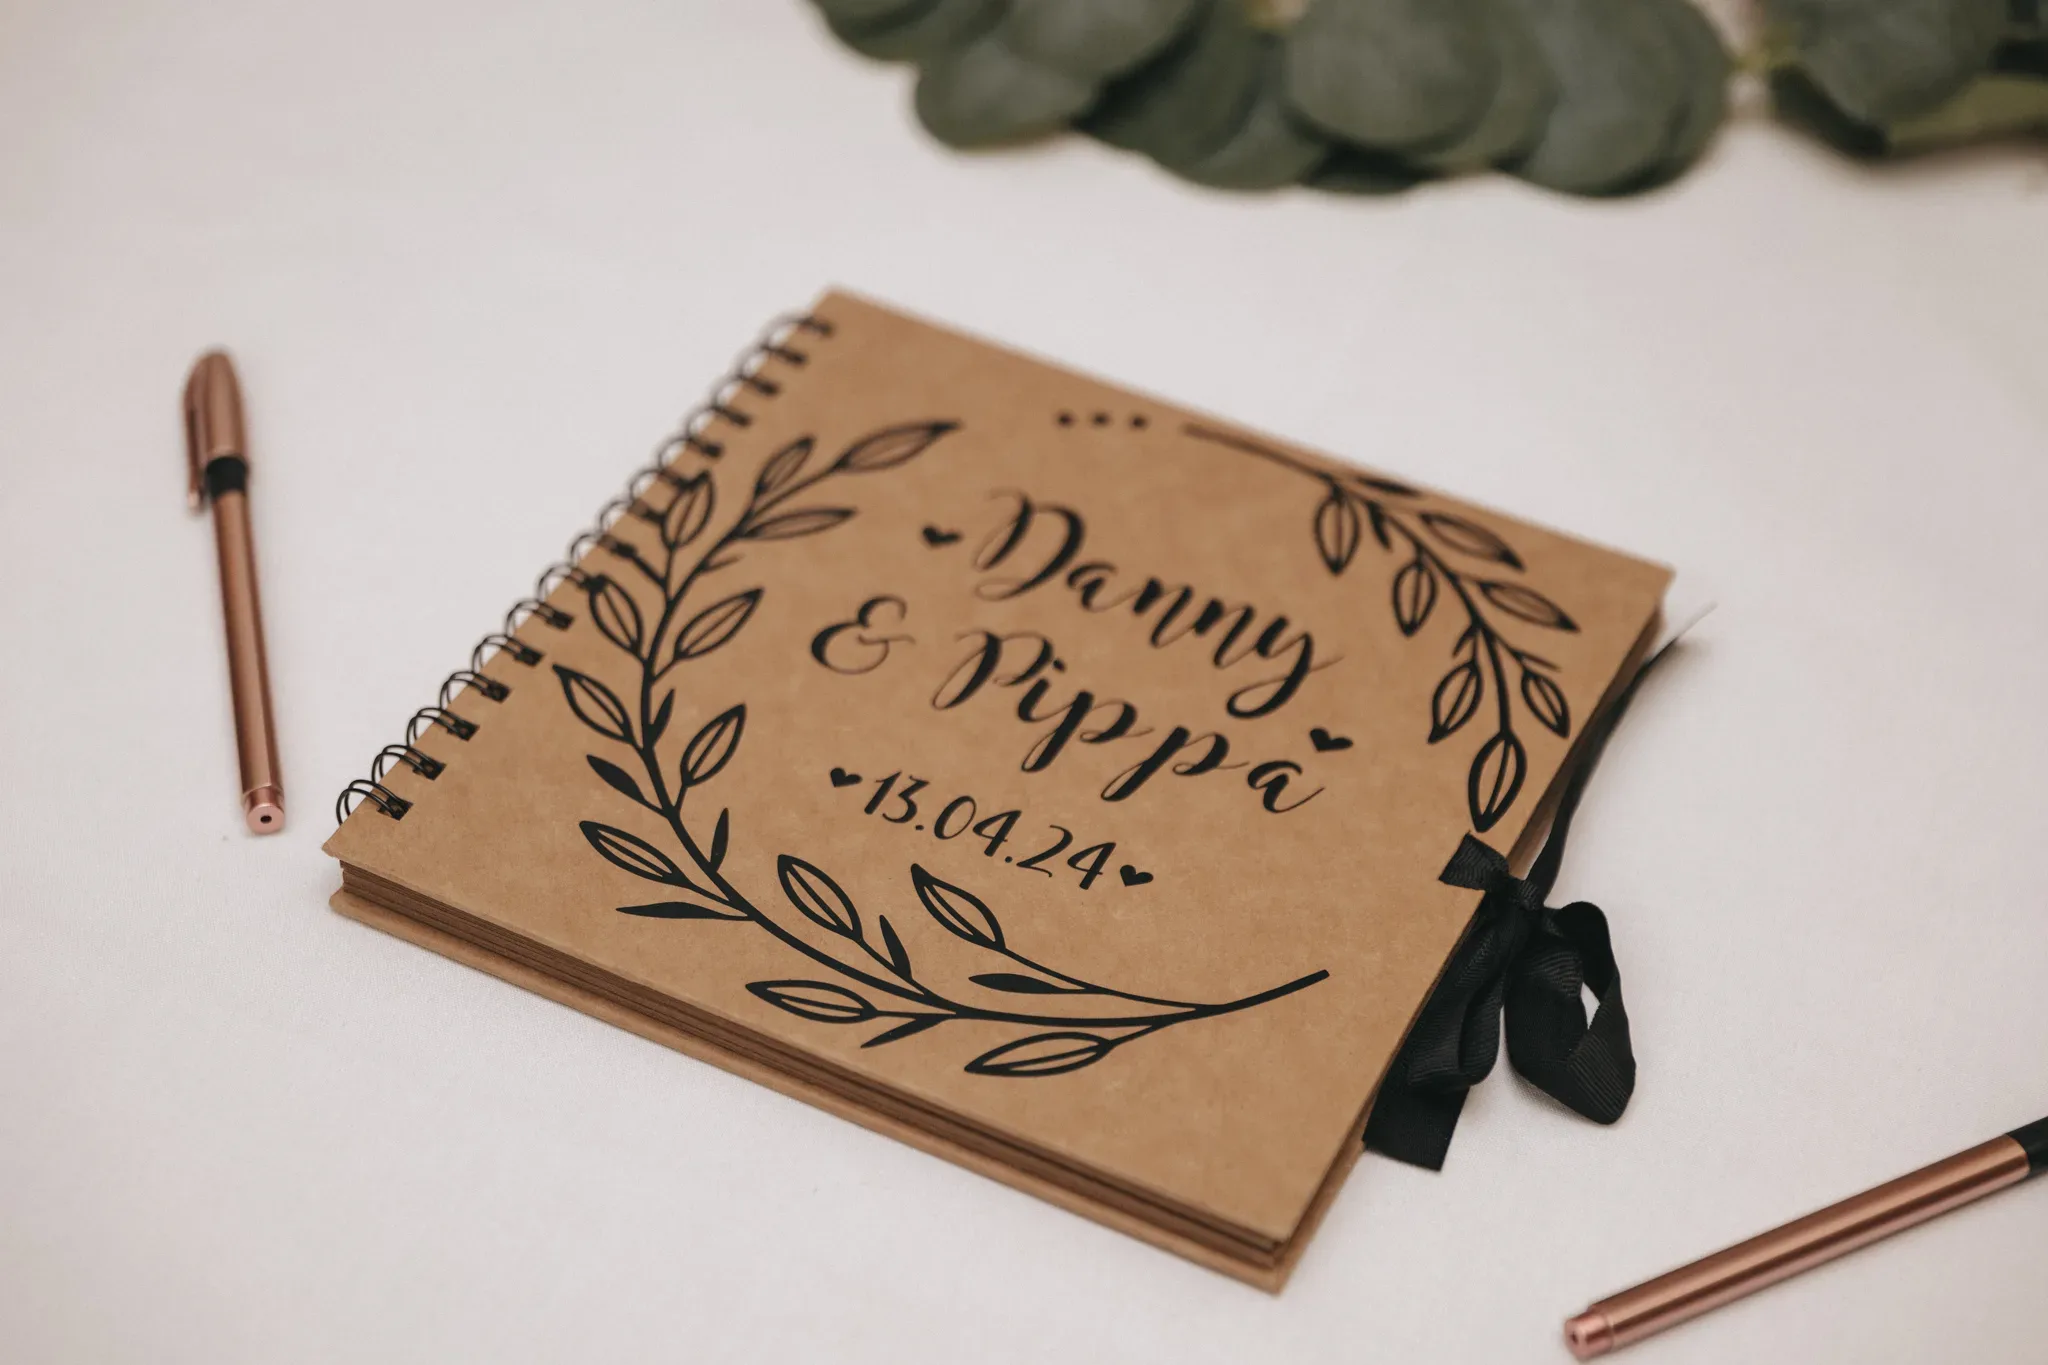 A personalized notebook with a brown cover, titled "danny & myra * 13.09.14" in decorative script, surrounded by a floral design, lies on a white surface next to a copper pen and green leaves.